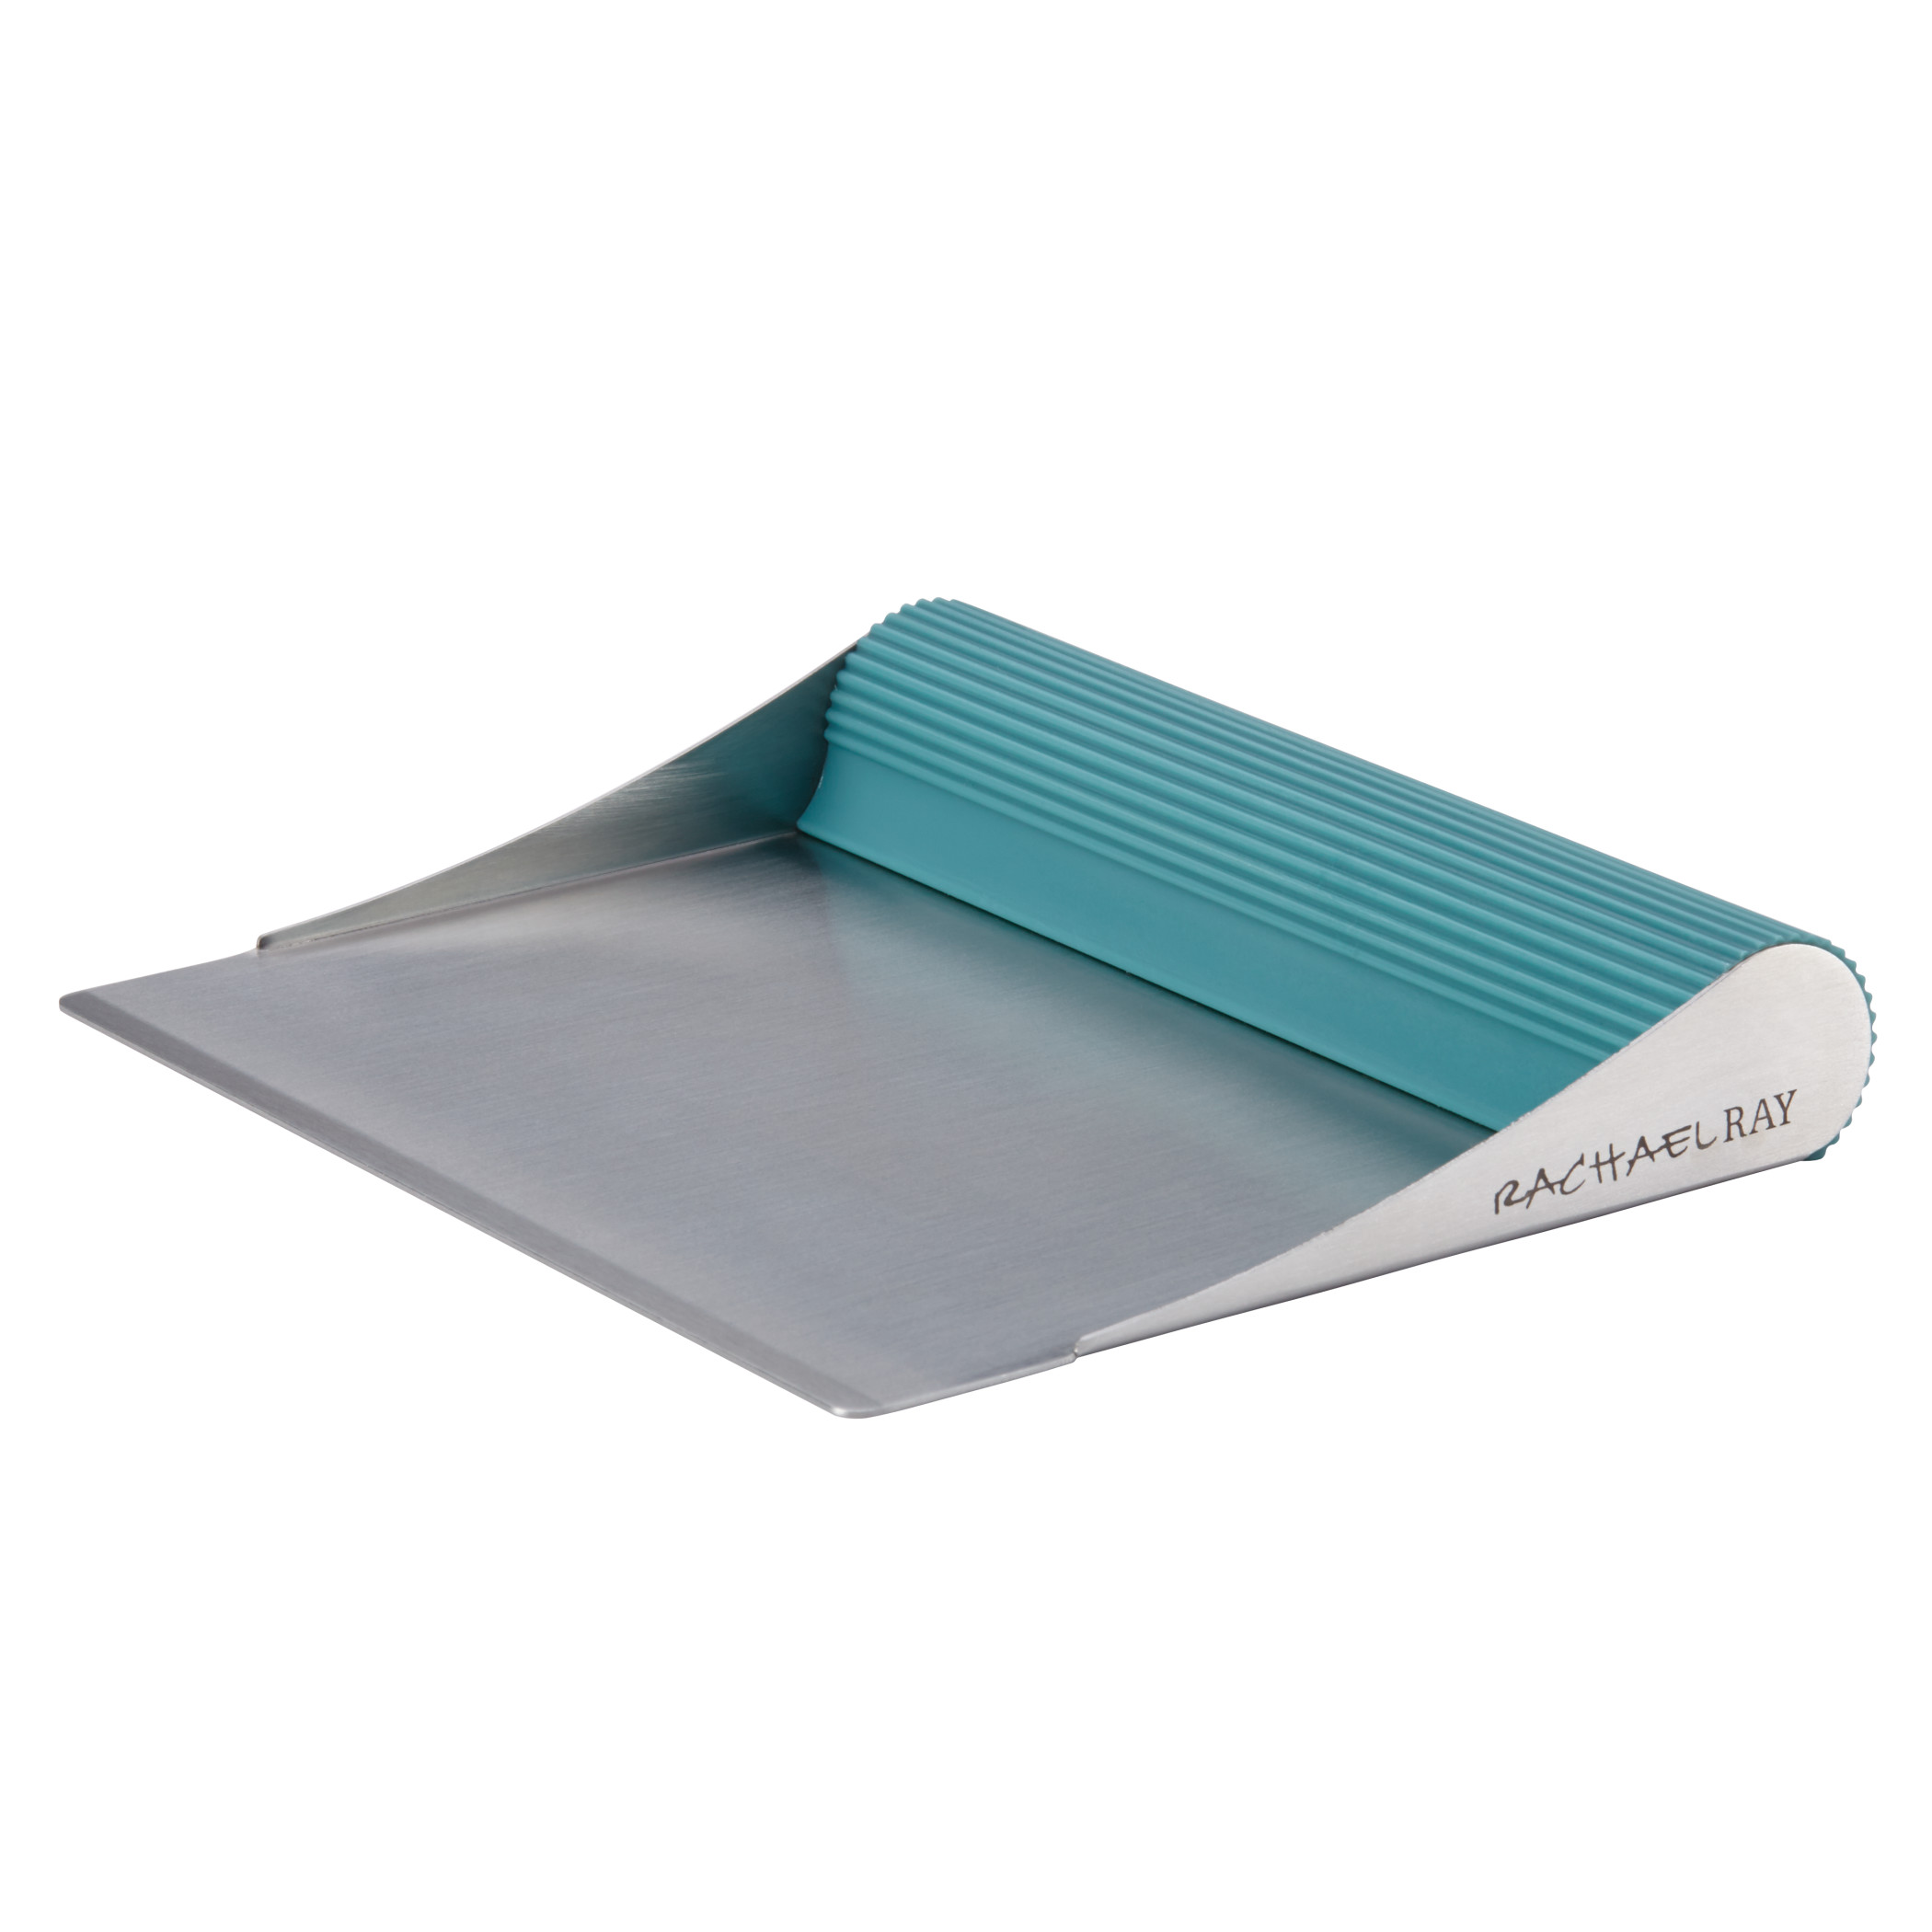 Rachael Ray Cucina Tools and Gadgets Bench Scrape, Agave Blue - image 1 of 6